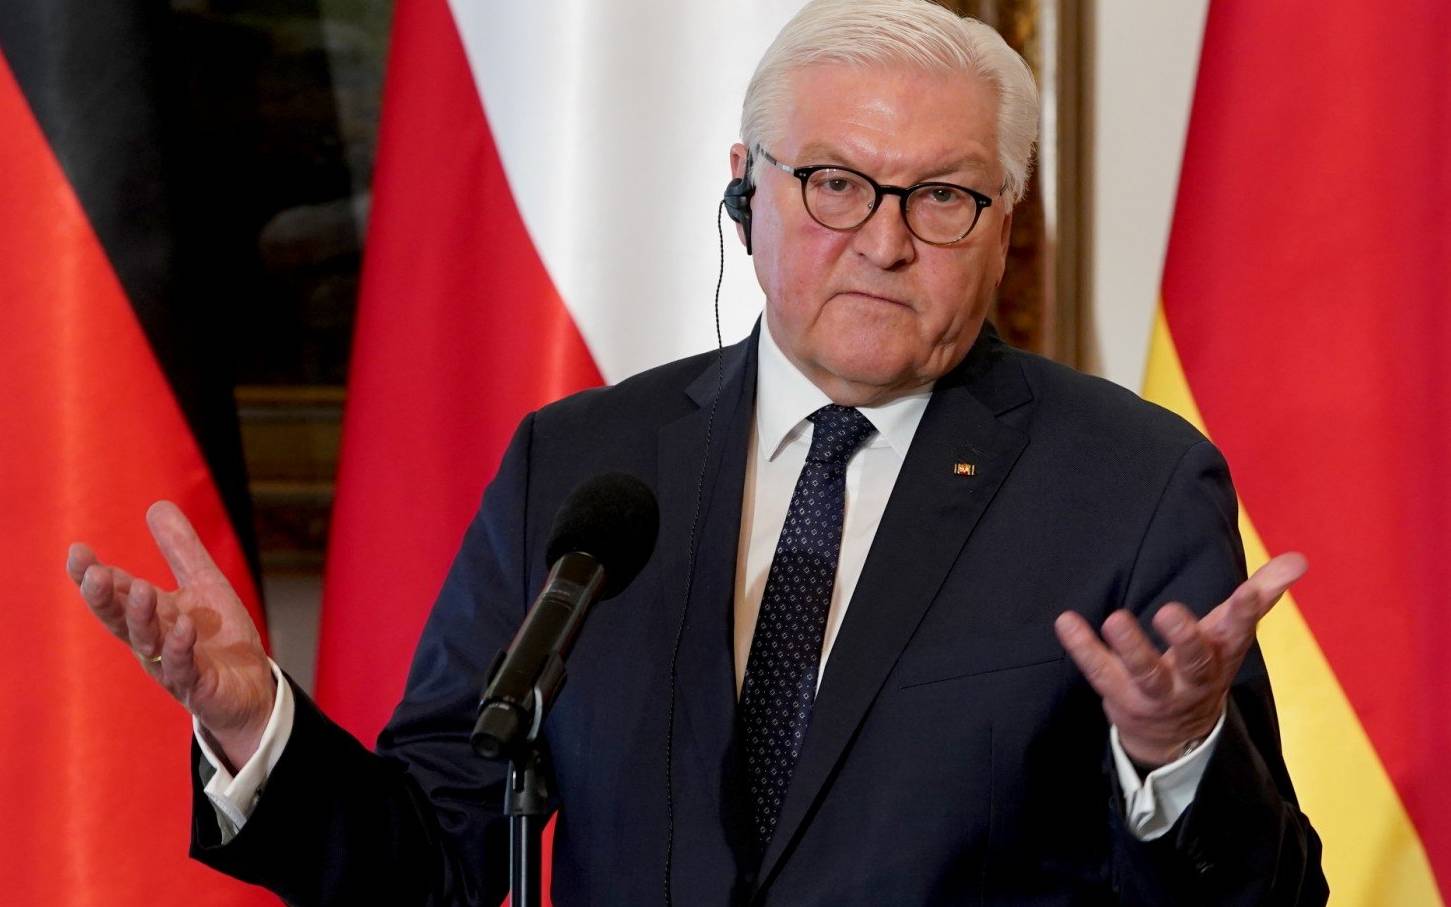 German President Frank-Walter Steinmeier attends a press briefing with the Polish President after their meeting in Warsaw on April 12, 2022. (Photo by JANEK SKARZYNSKI / AFP)